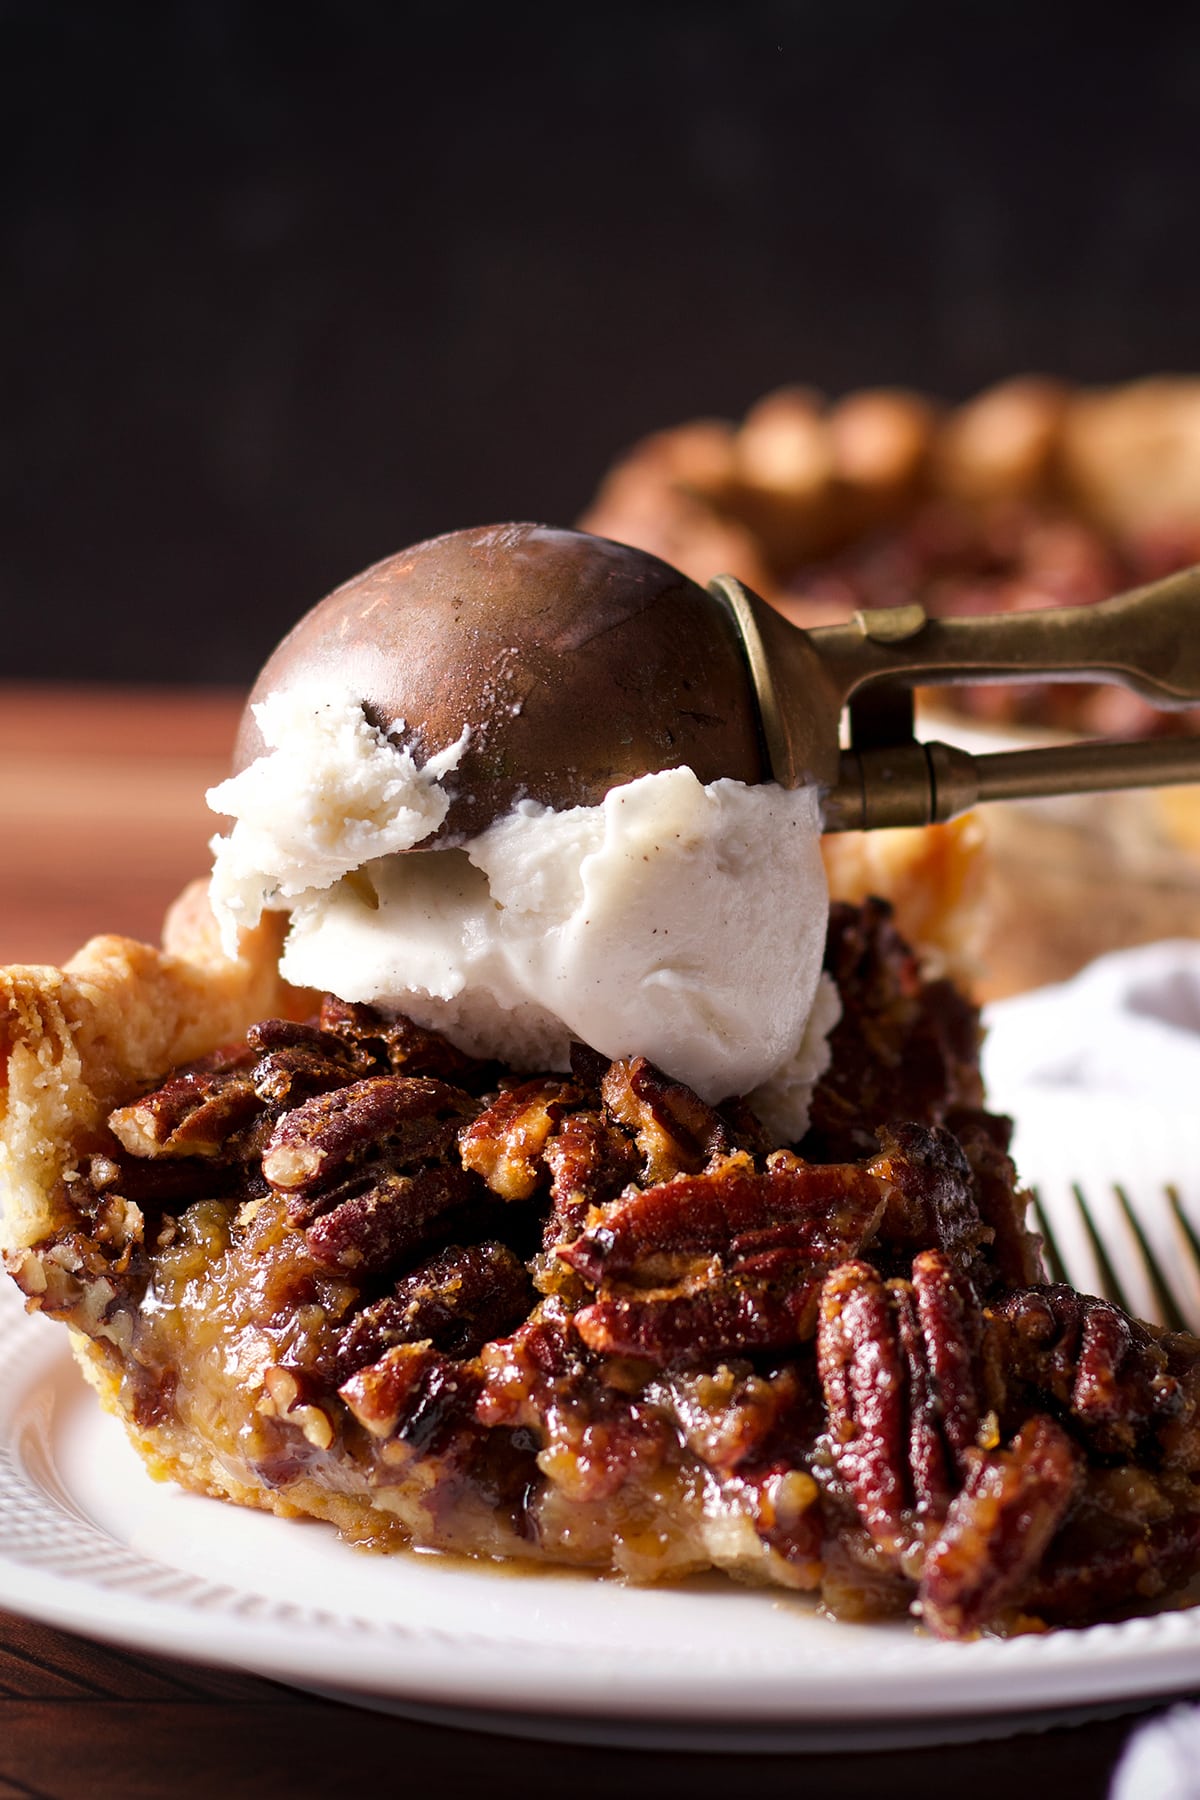 Someone using an old fashioned ice cream scoop to top a slice of pecan pie with vanilla ice cream.